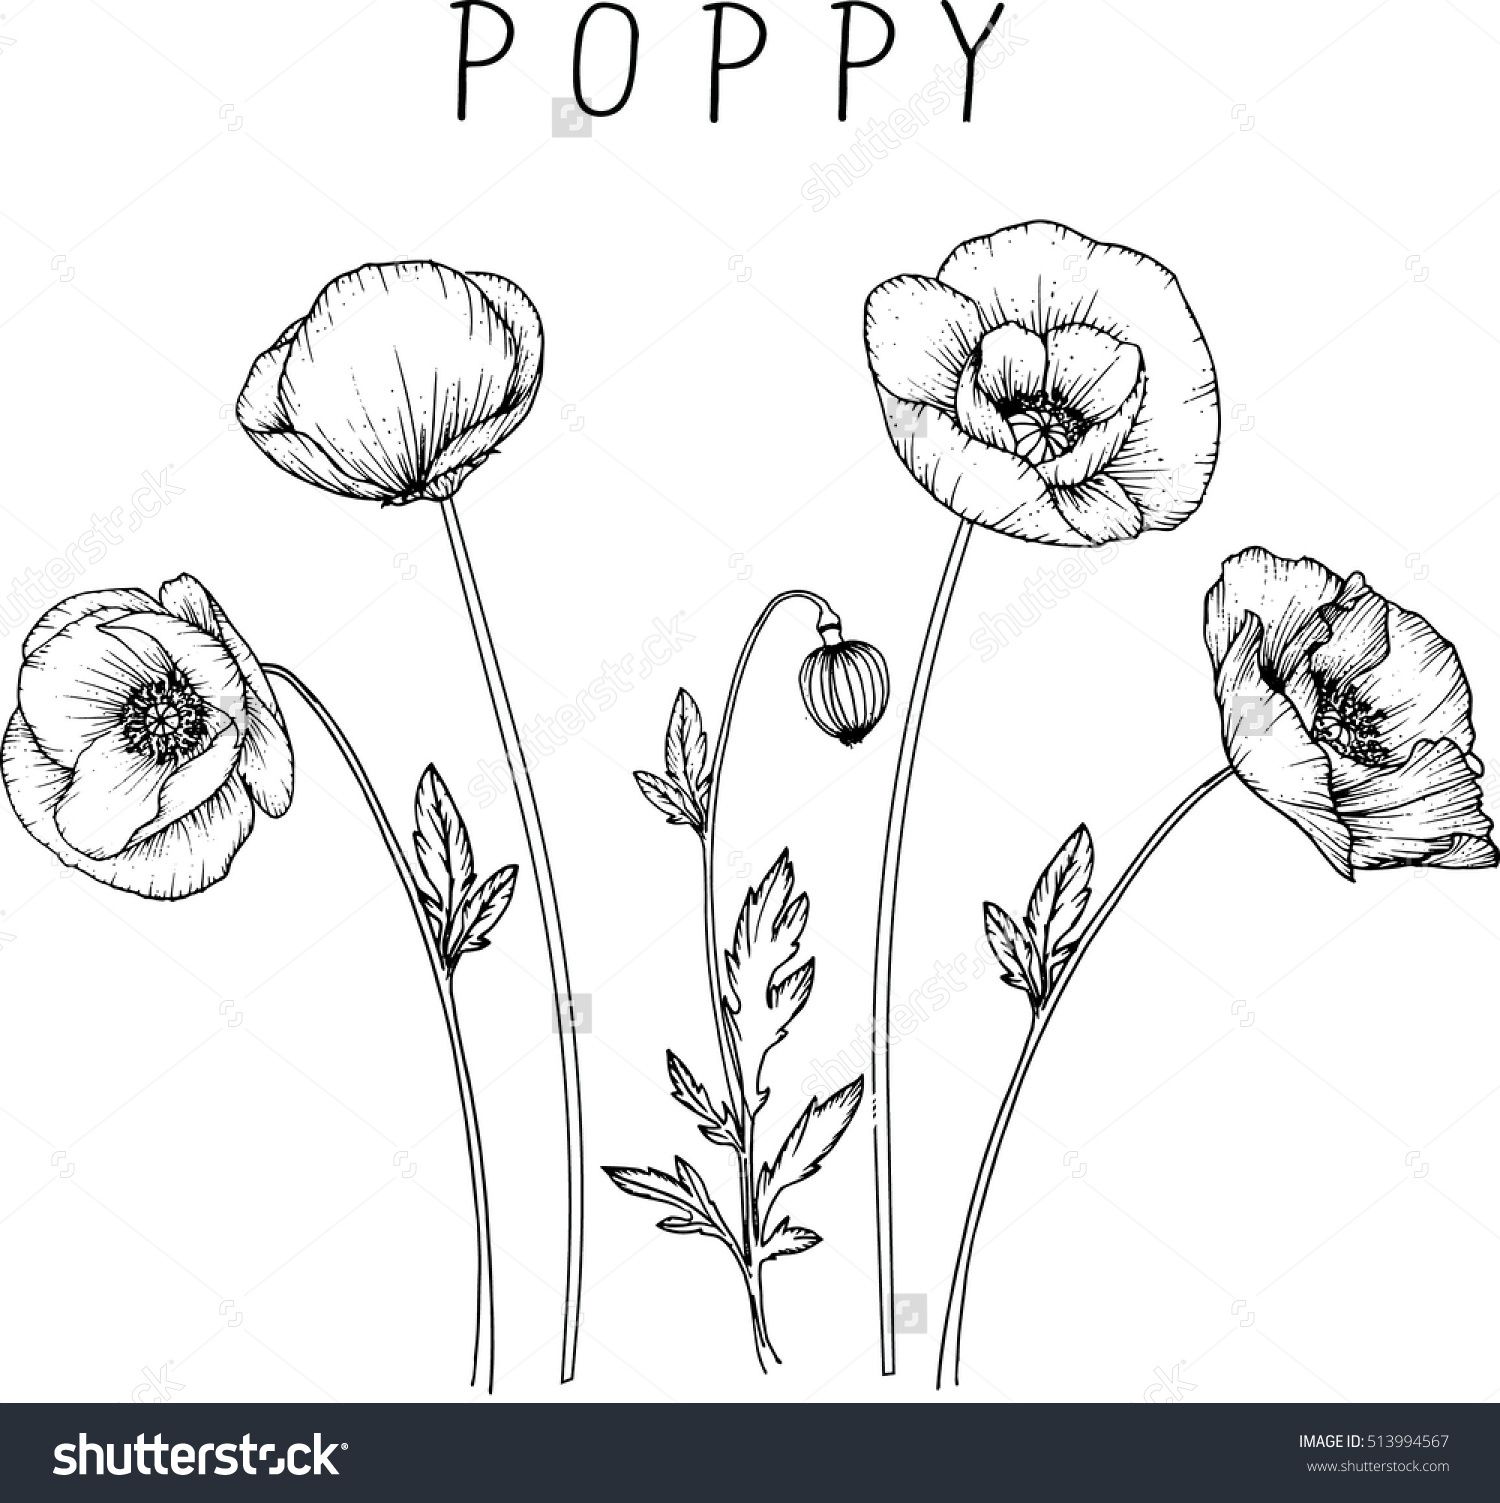 Poppy clipart drawing, Poppy drawing Transparent FREE for download on ...